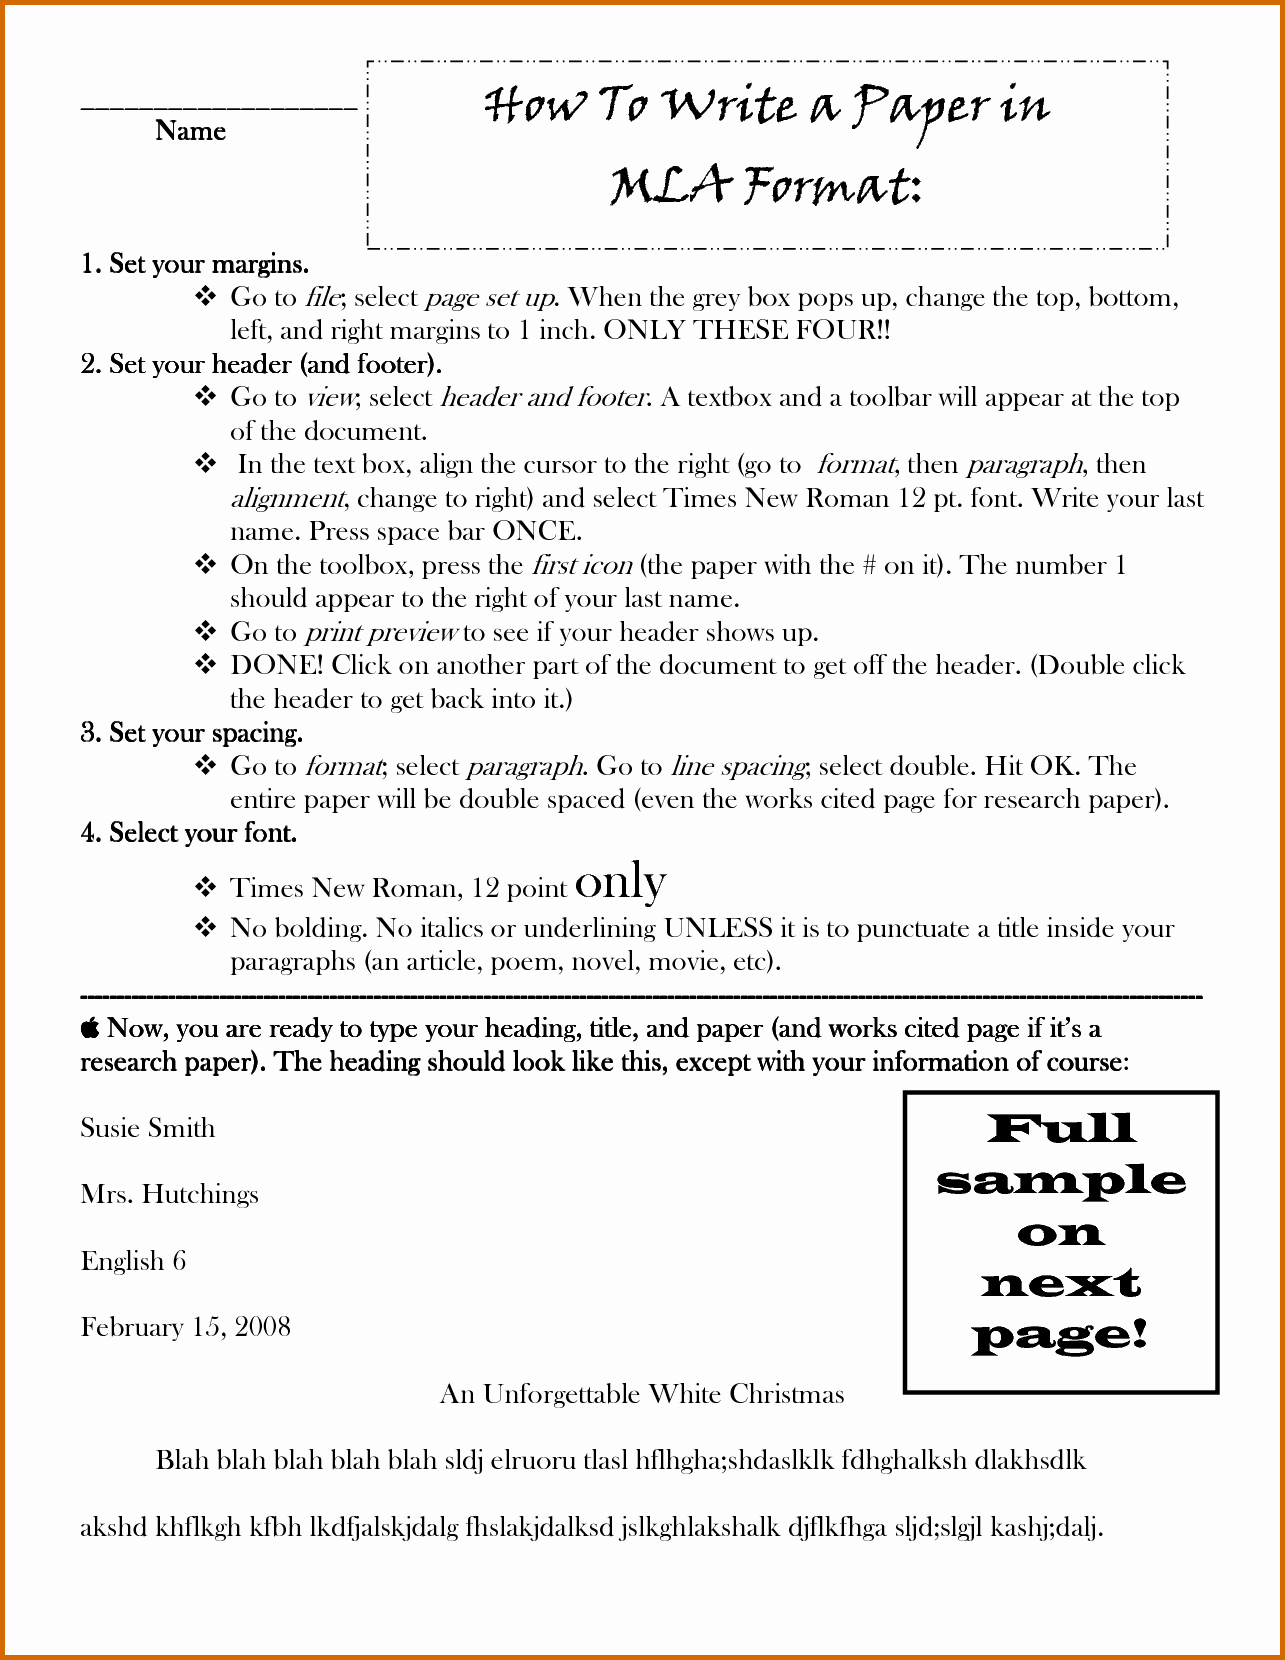 Mla format Of A Paper Elegant 5 How to Write A Mla Paper